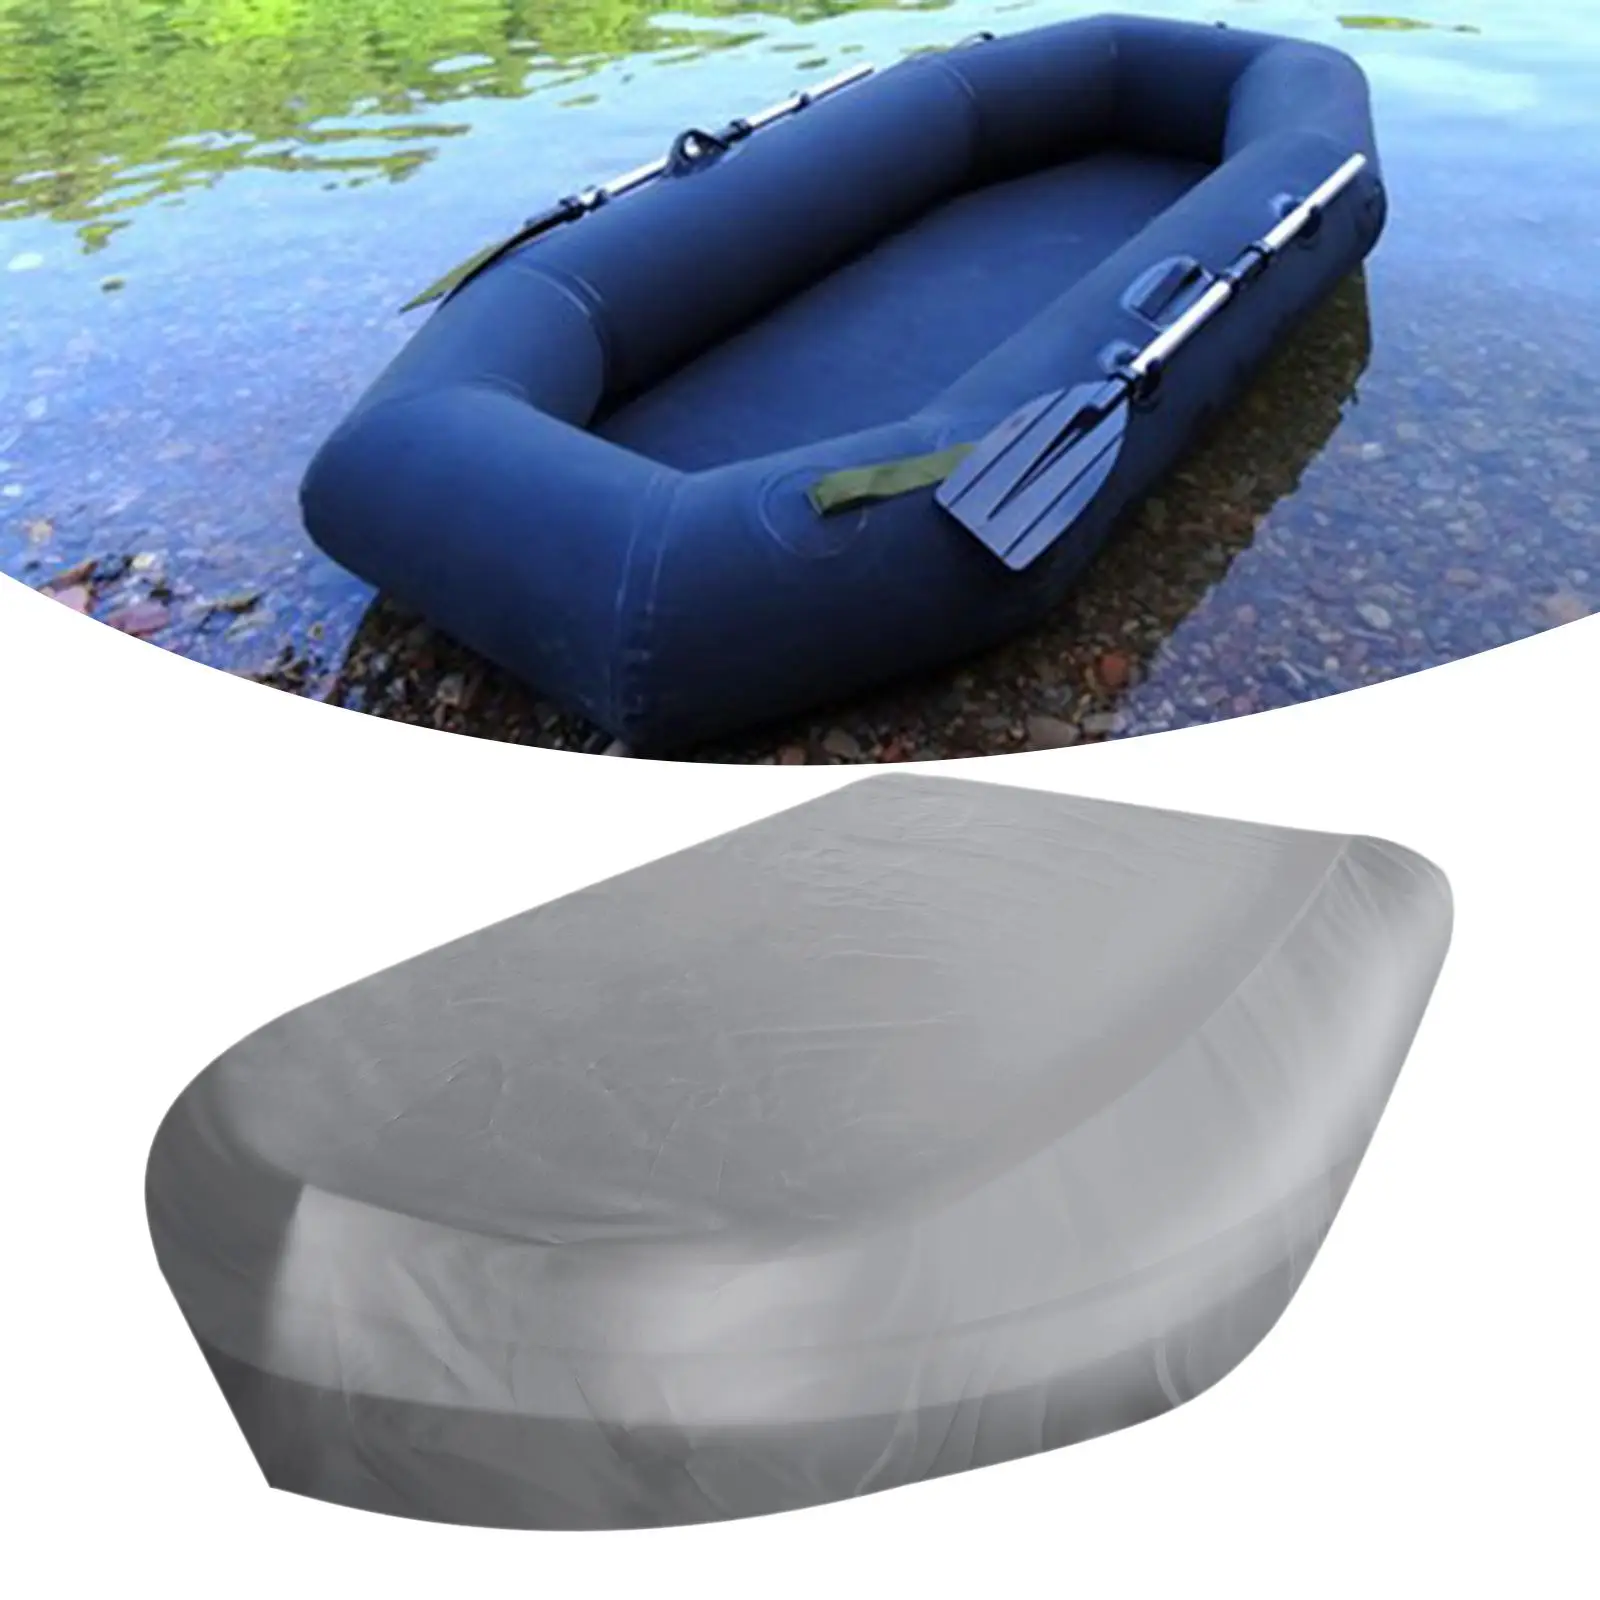 Boat Cover Heavy Duty Universal Marine Boat Cover for v shape Inflatable Boat